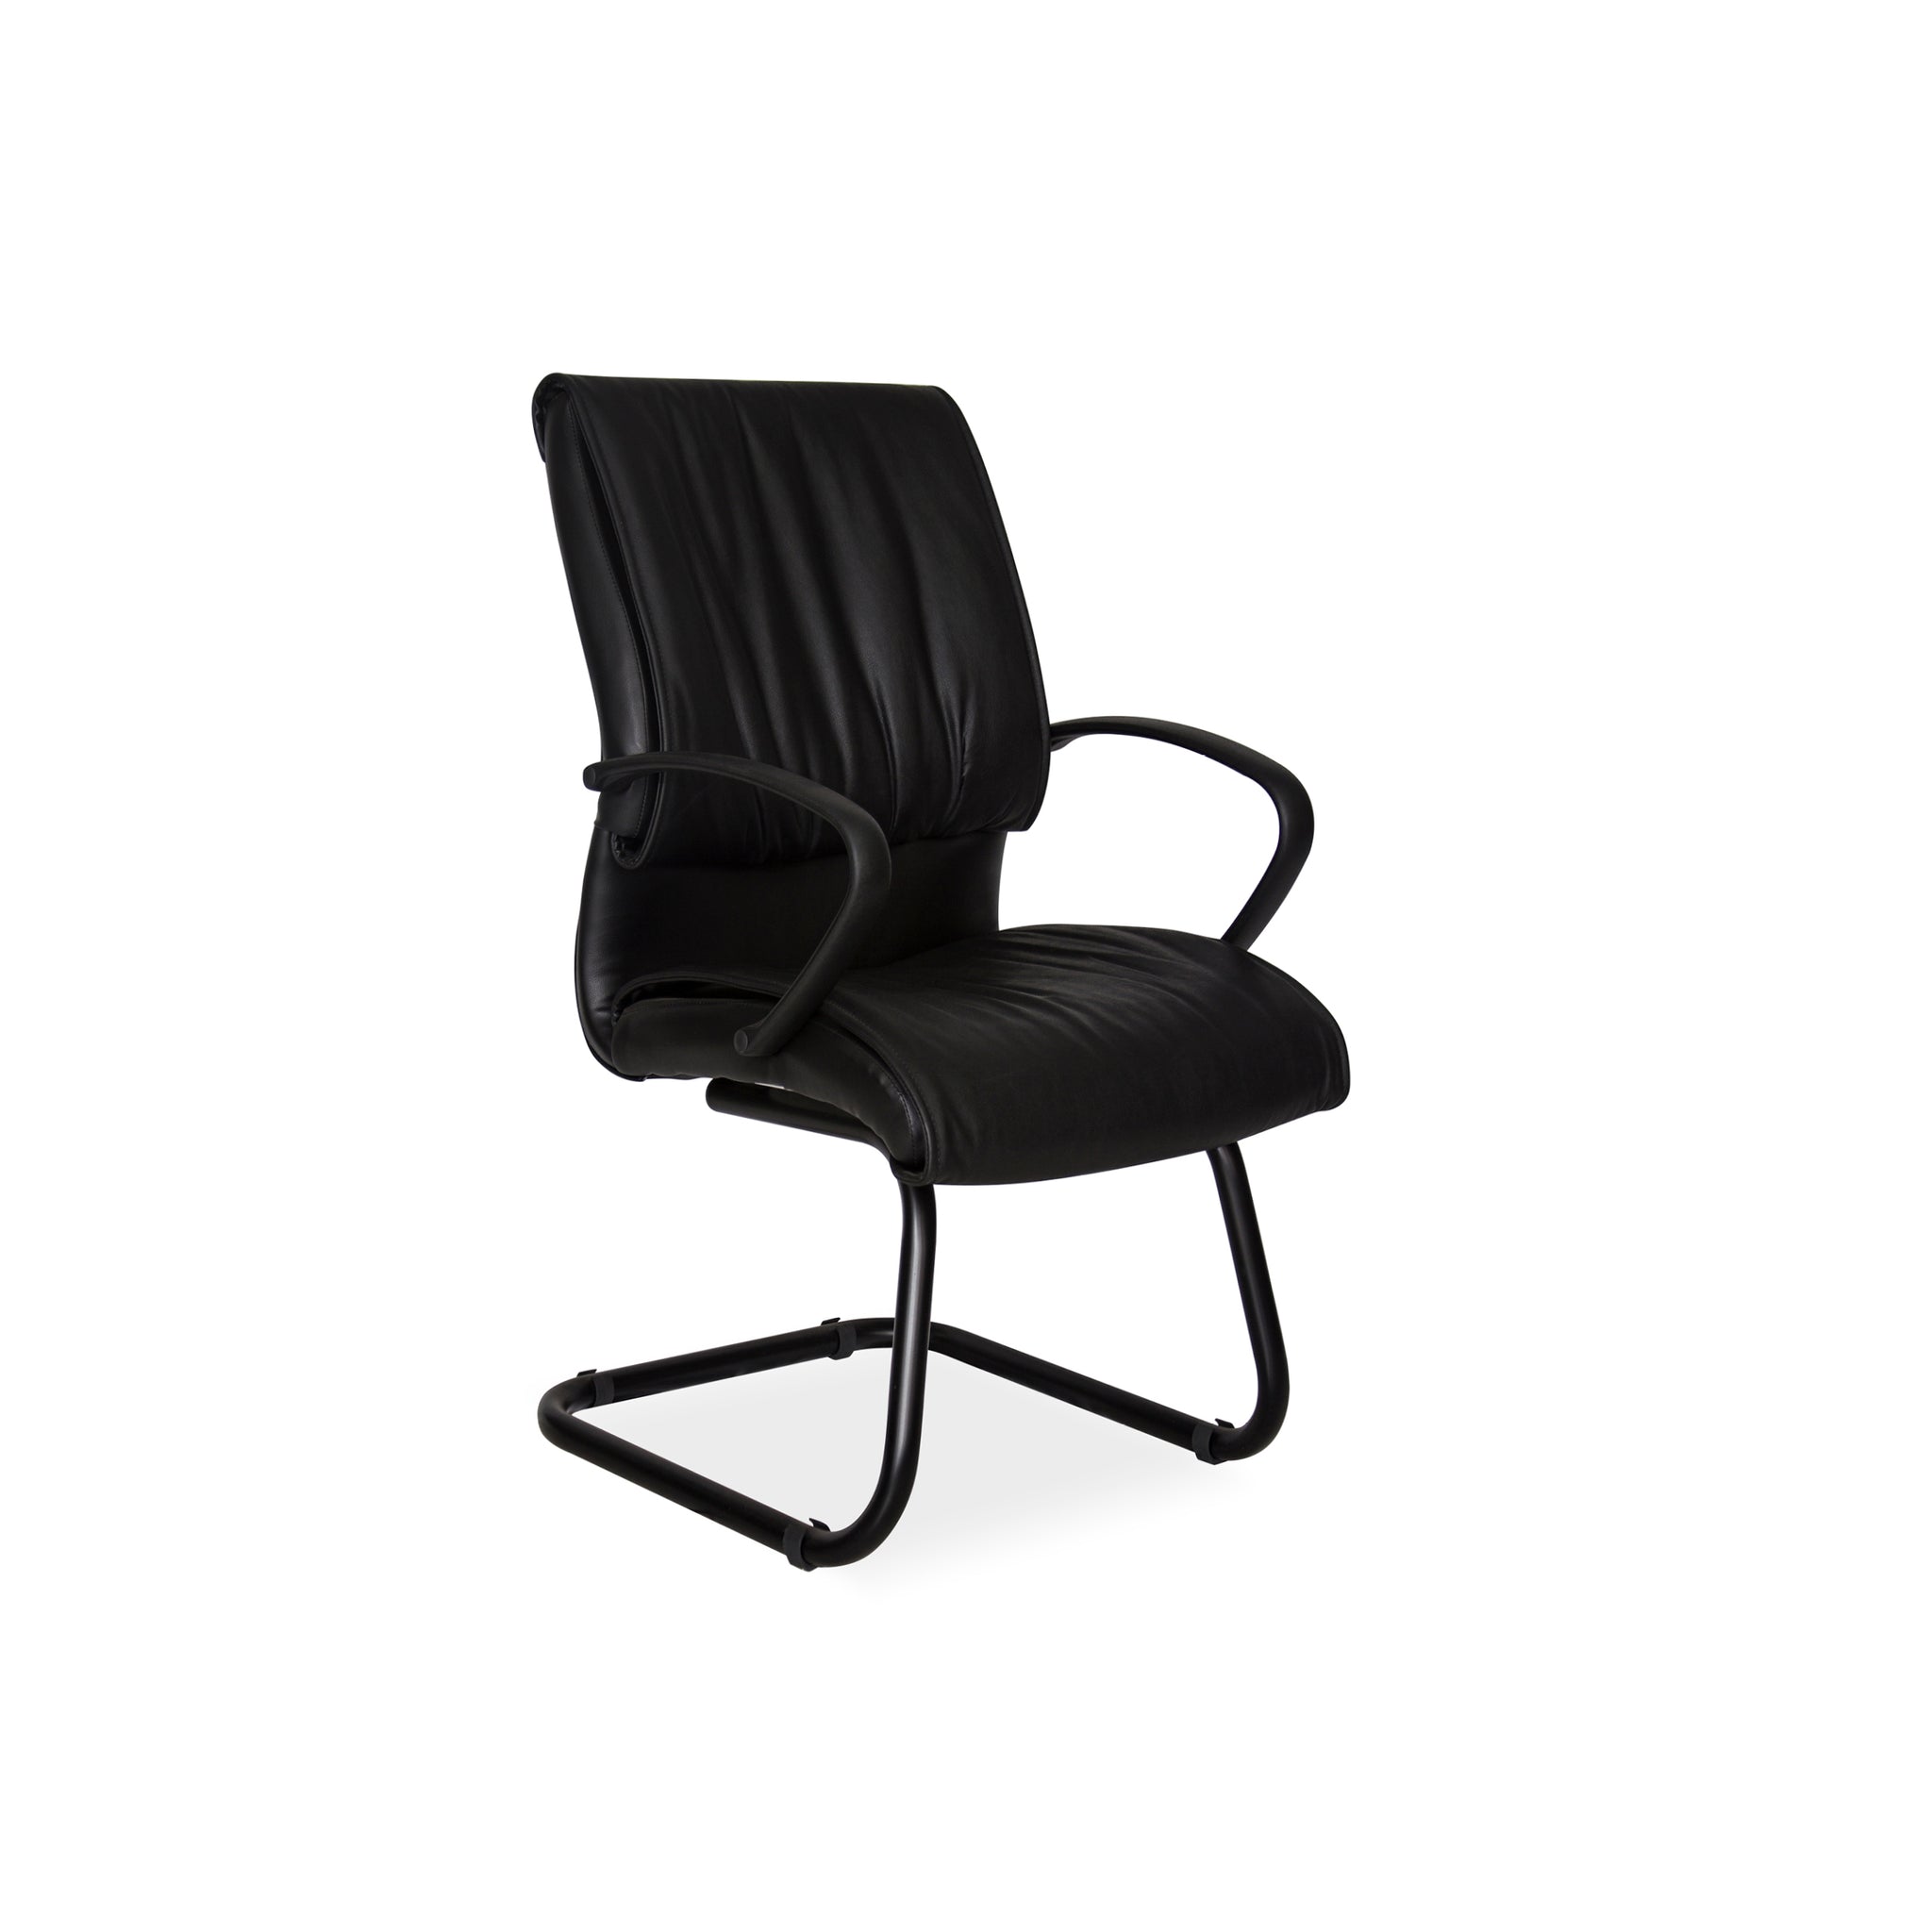 Hedcor Mirage visitors office chair